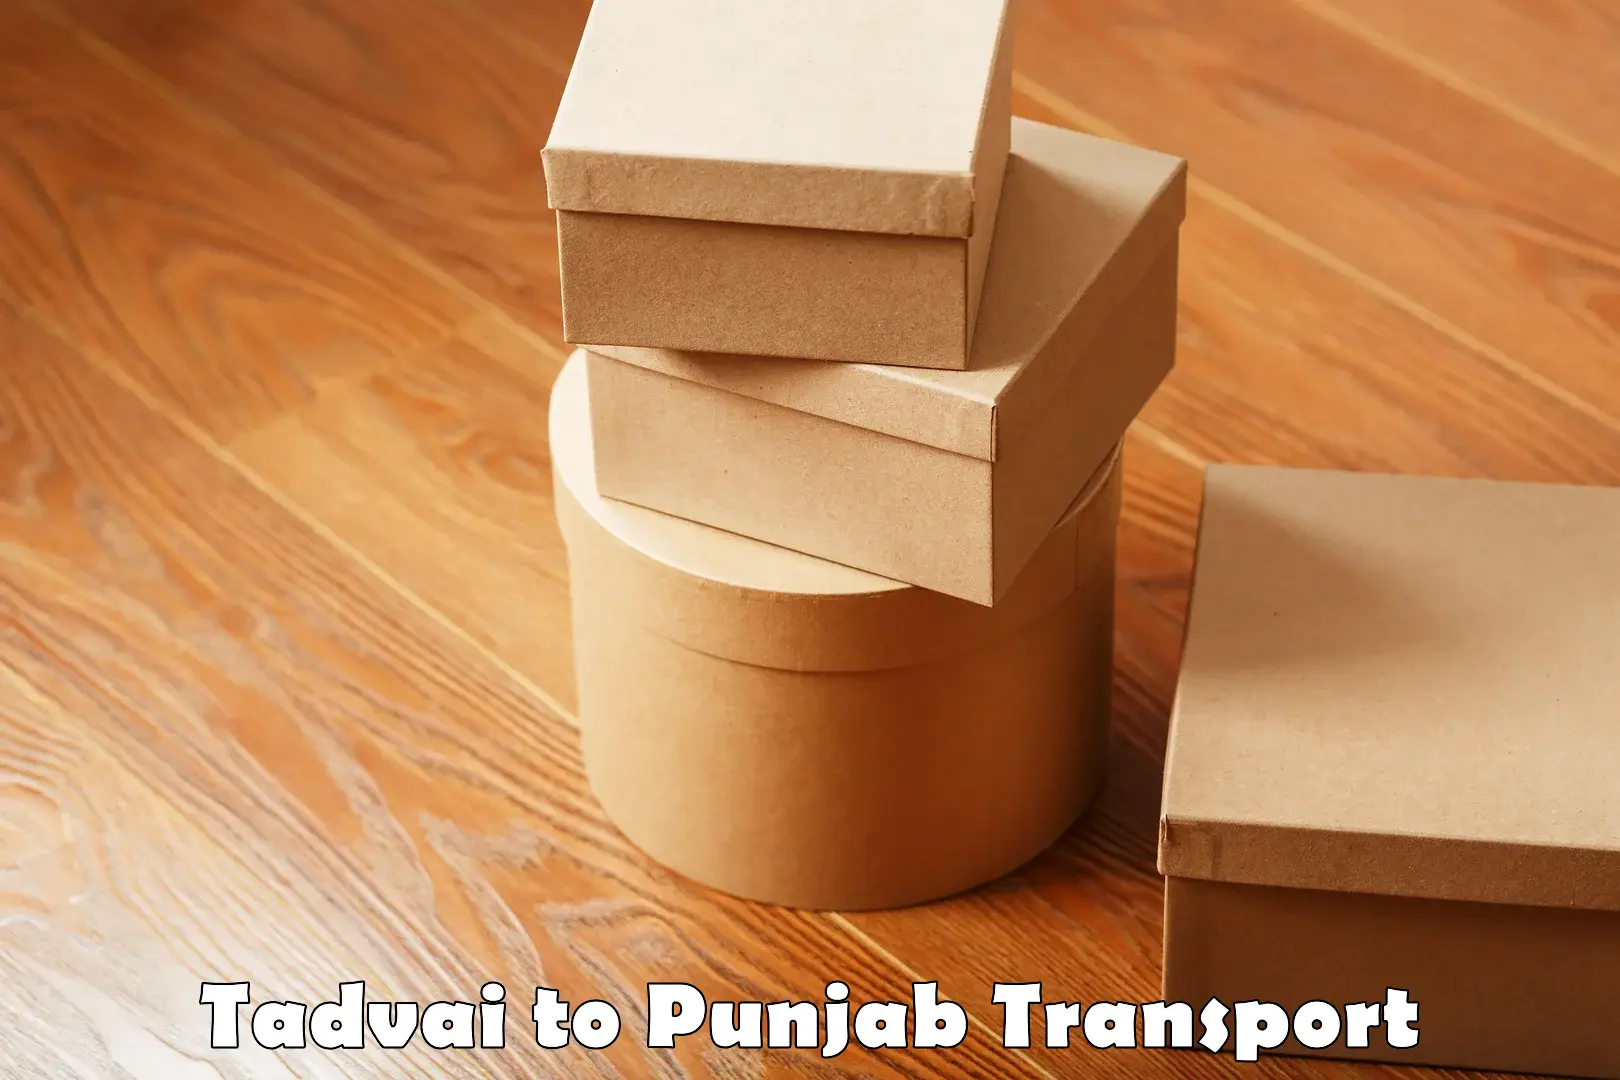 Commercial transport service Tadvai to Punjab